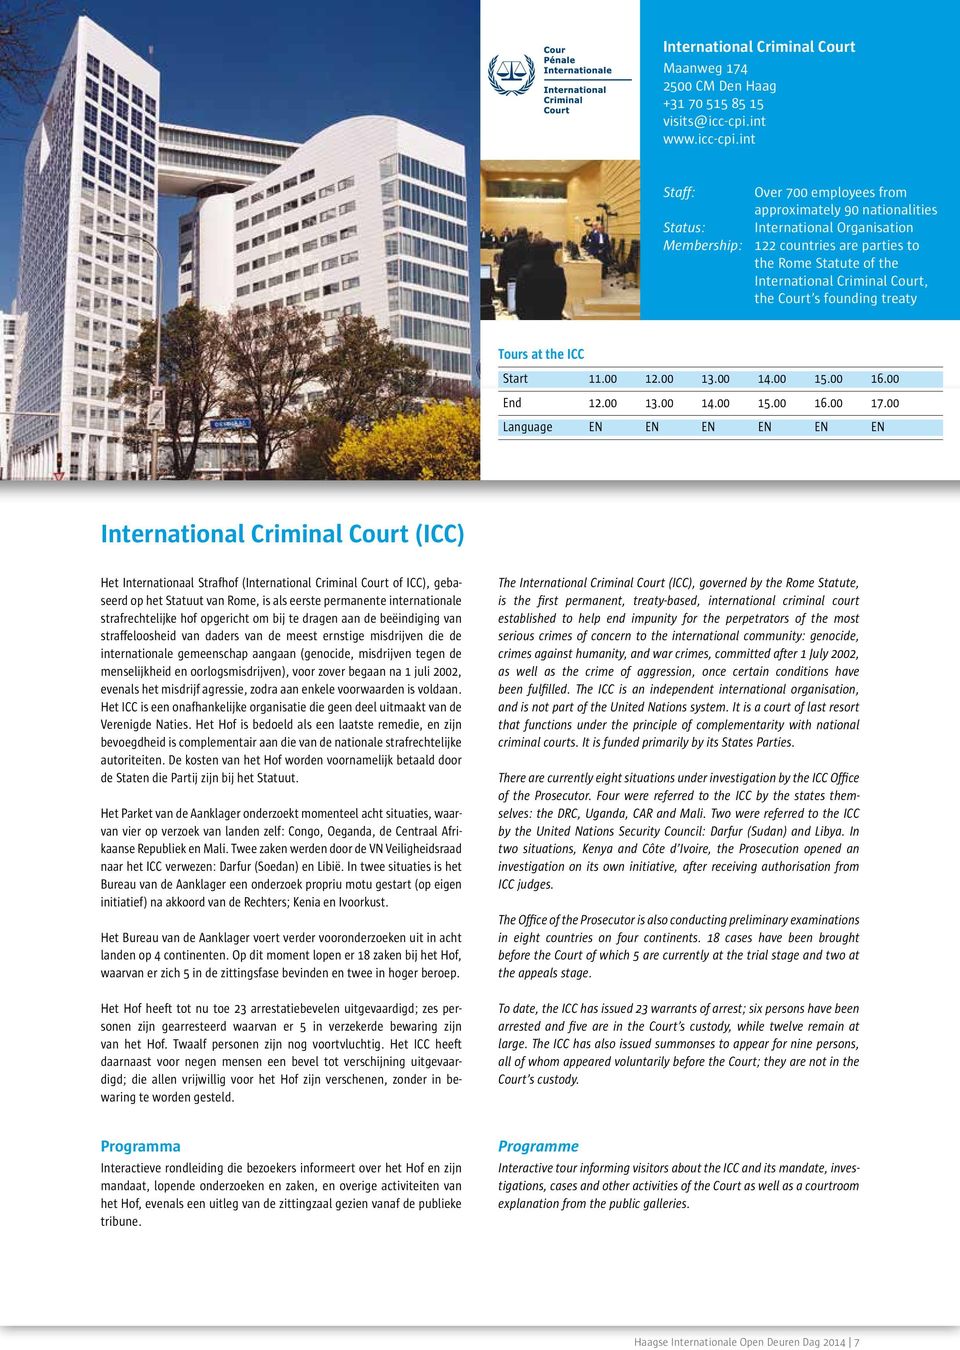 int Staff: Over 700 employees from approximately 90 nationalities Status: International Organisation Membership: 122 countries are parties to the Rome Statute of the International Criminal Court, the